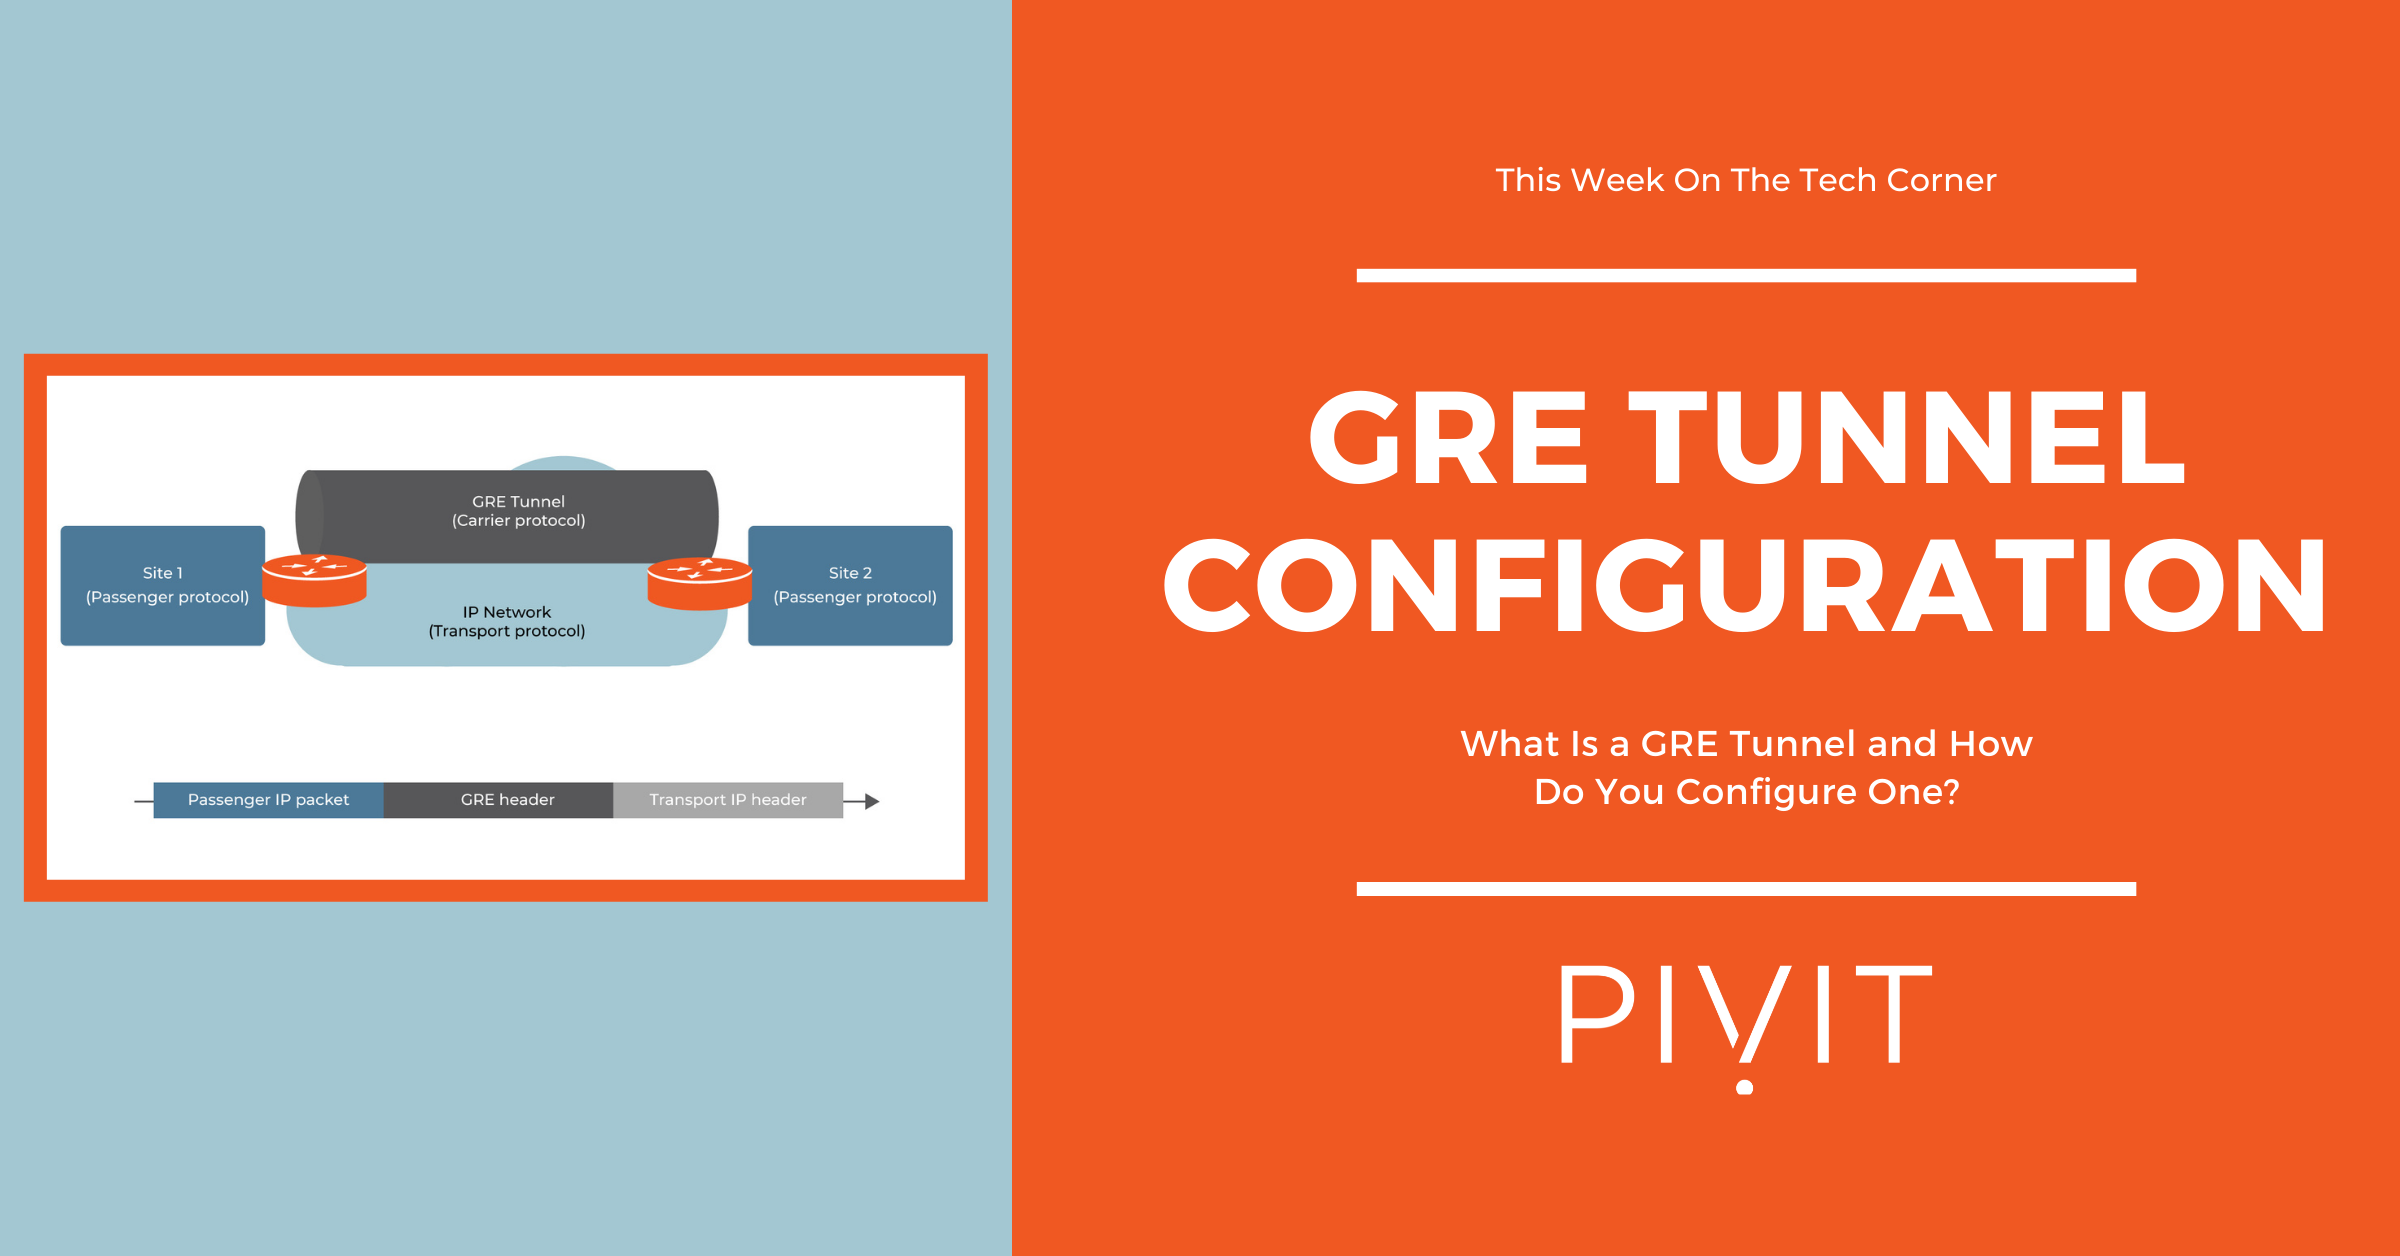 What Is a GRE Tunnel and How Do You Configure One?